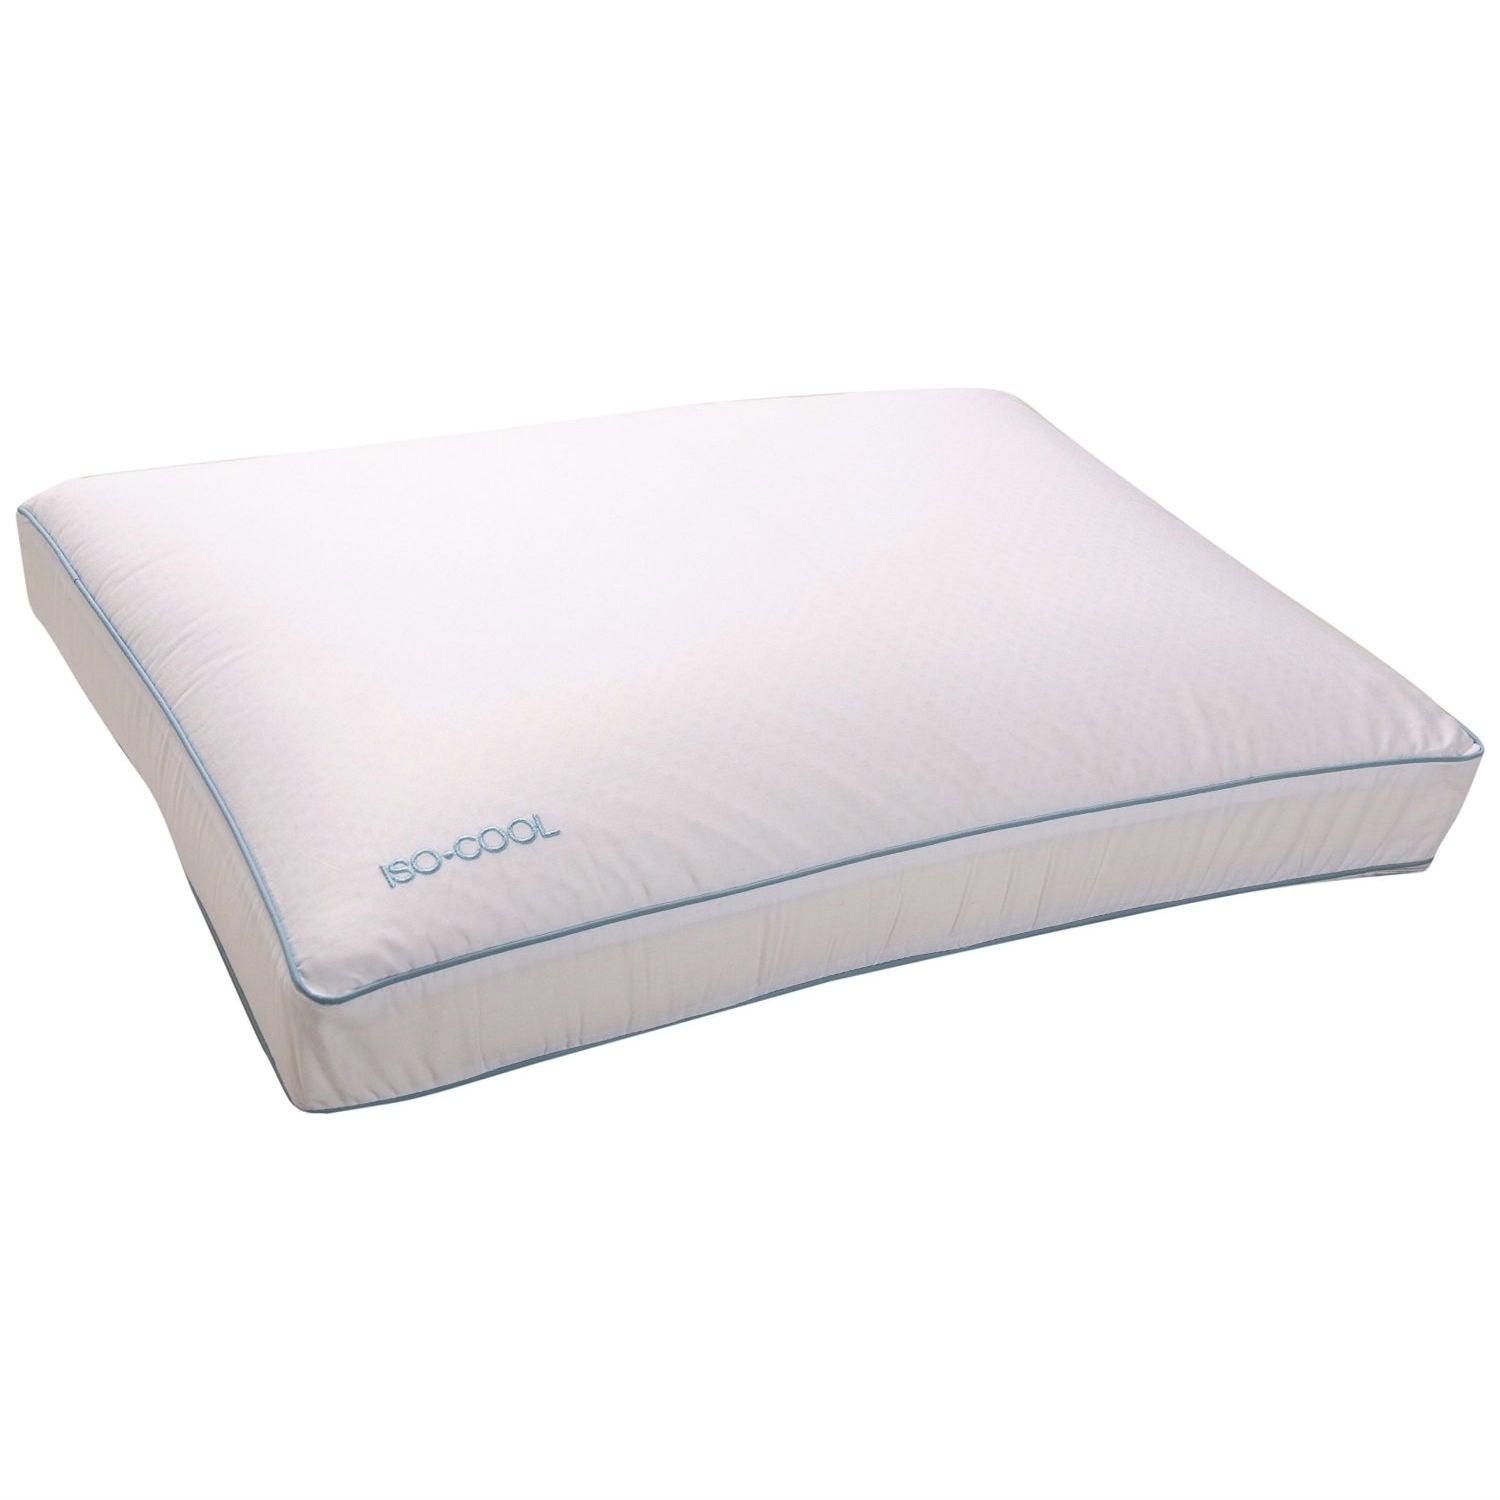 Side Sleeper Memory Foam Pillow with 100% Cotton Cover - Standard size